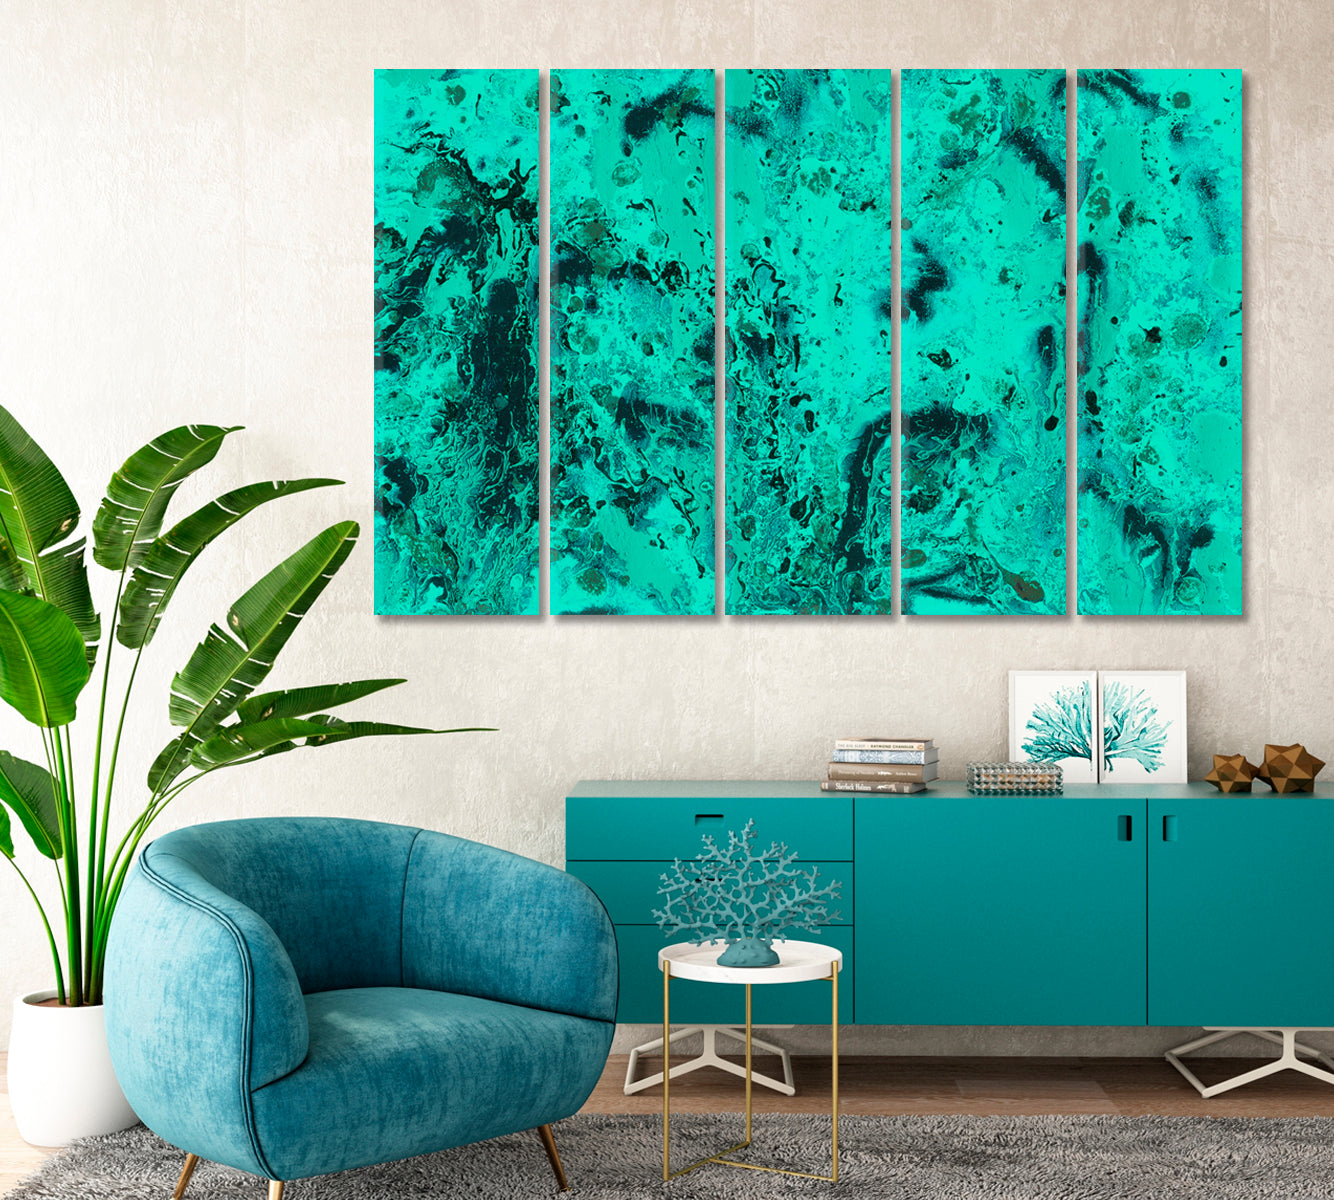 Abstract Turquoise Watercolor Splashes Canvas Print-Canvas Print-CetArt-1 Panel-24x16 inches-CetArt